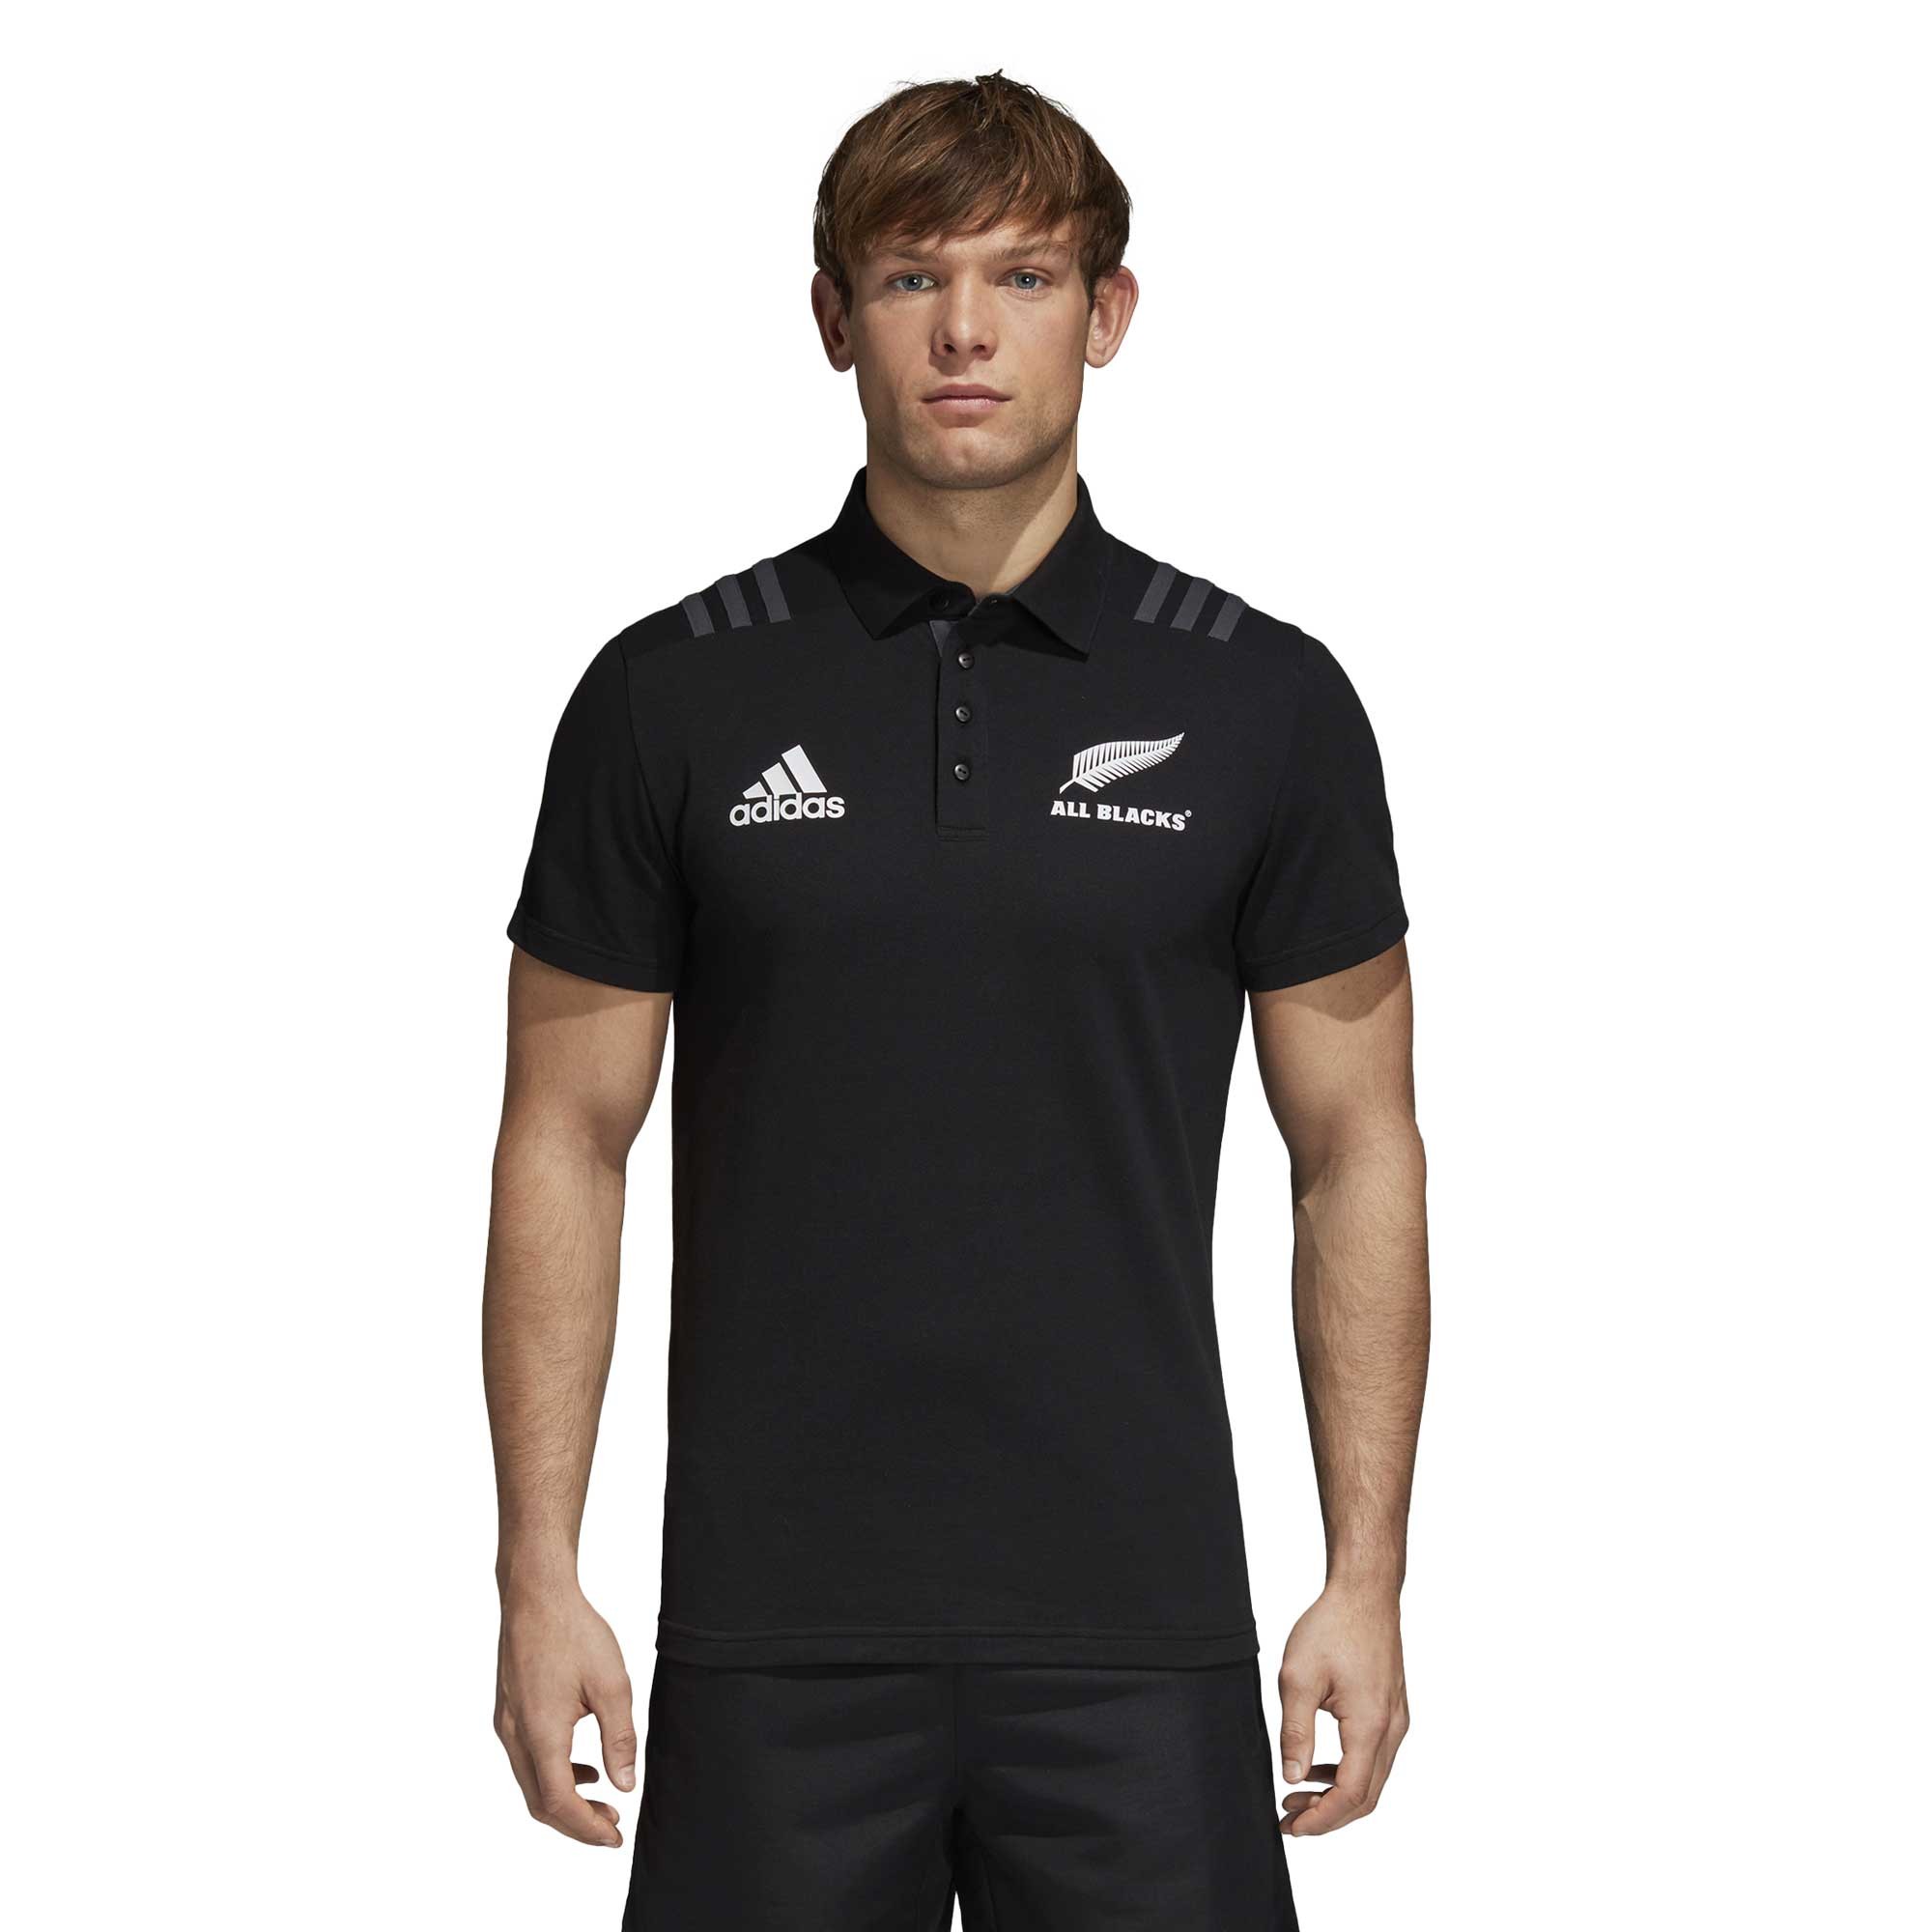 adidas polo rugby